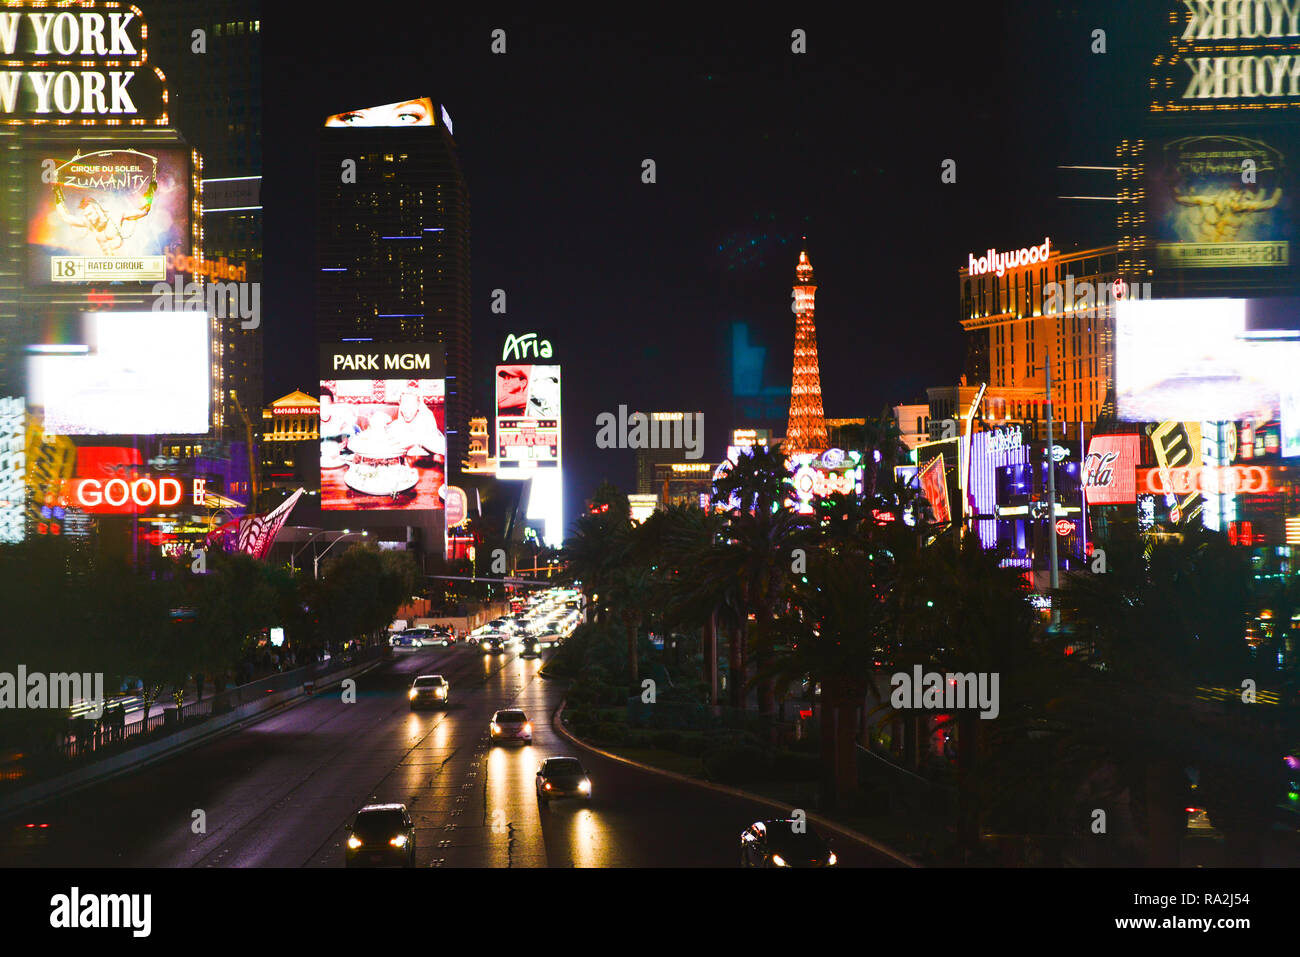 The Las Vegas, NV strip at night, busy with traffic, viewed from a pedestrian bridge of Neon lights and marquees for Casinos and Hotels on the Strip Stock Photo